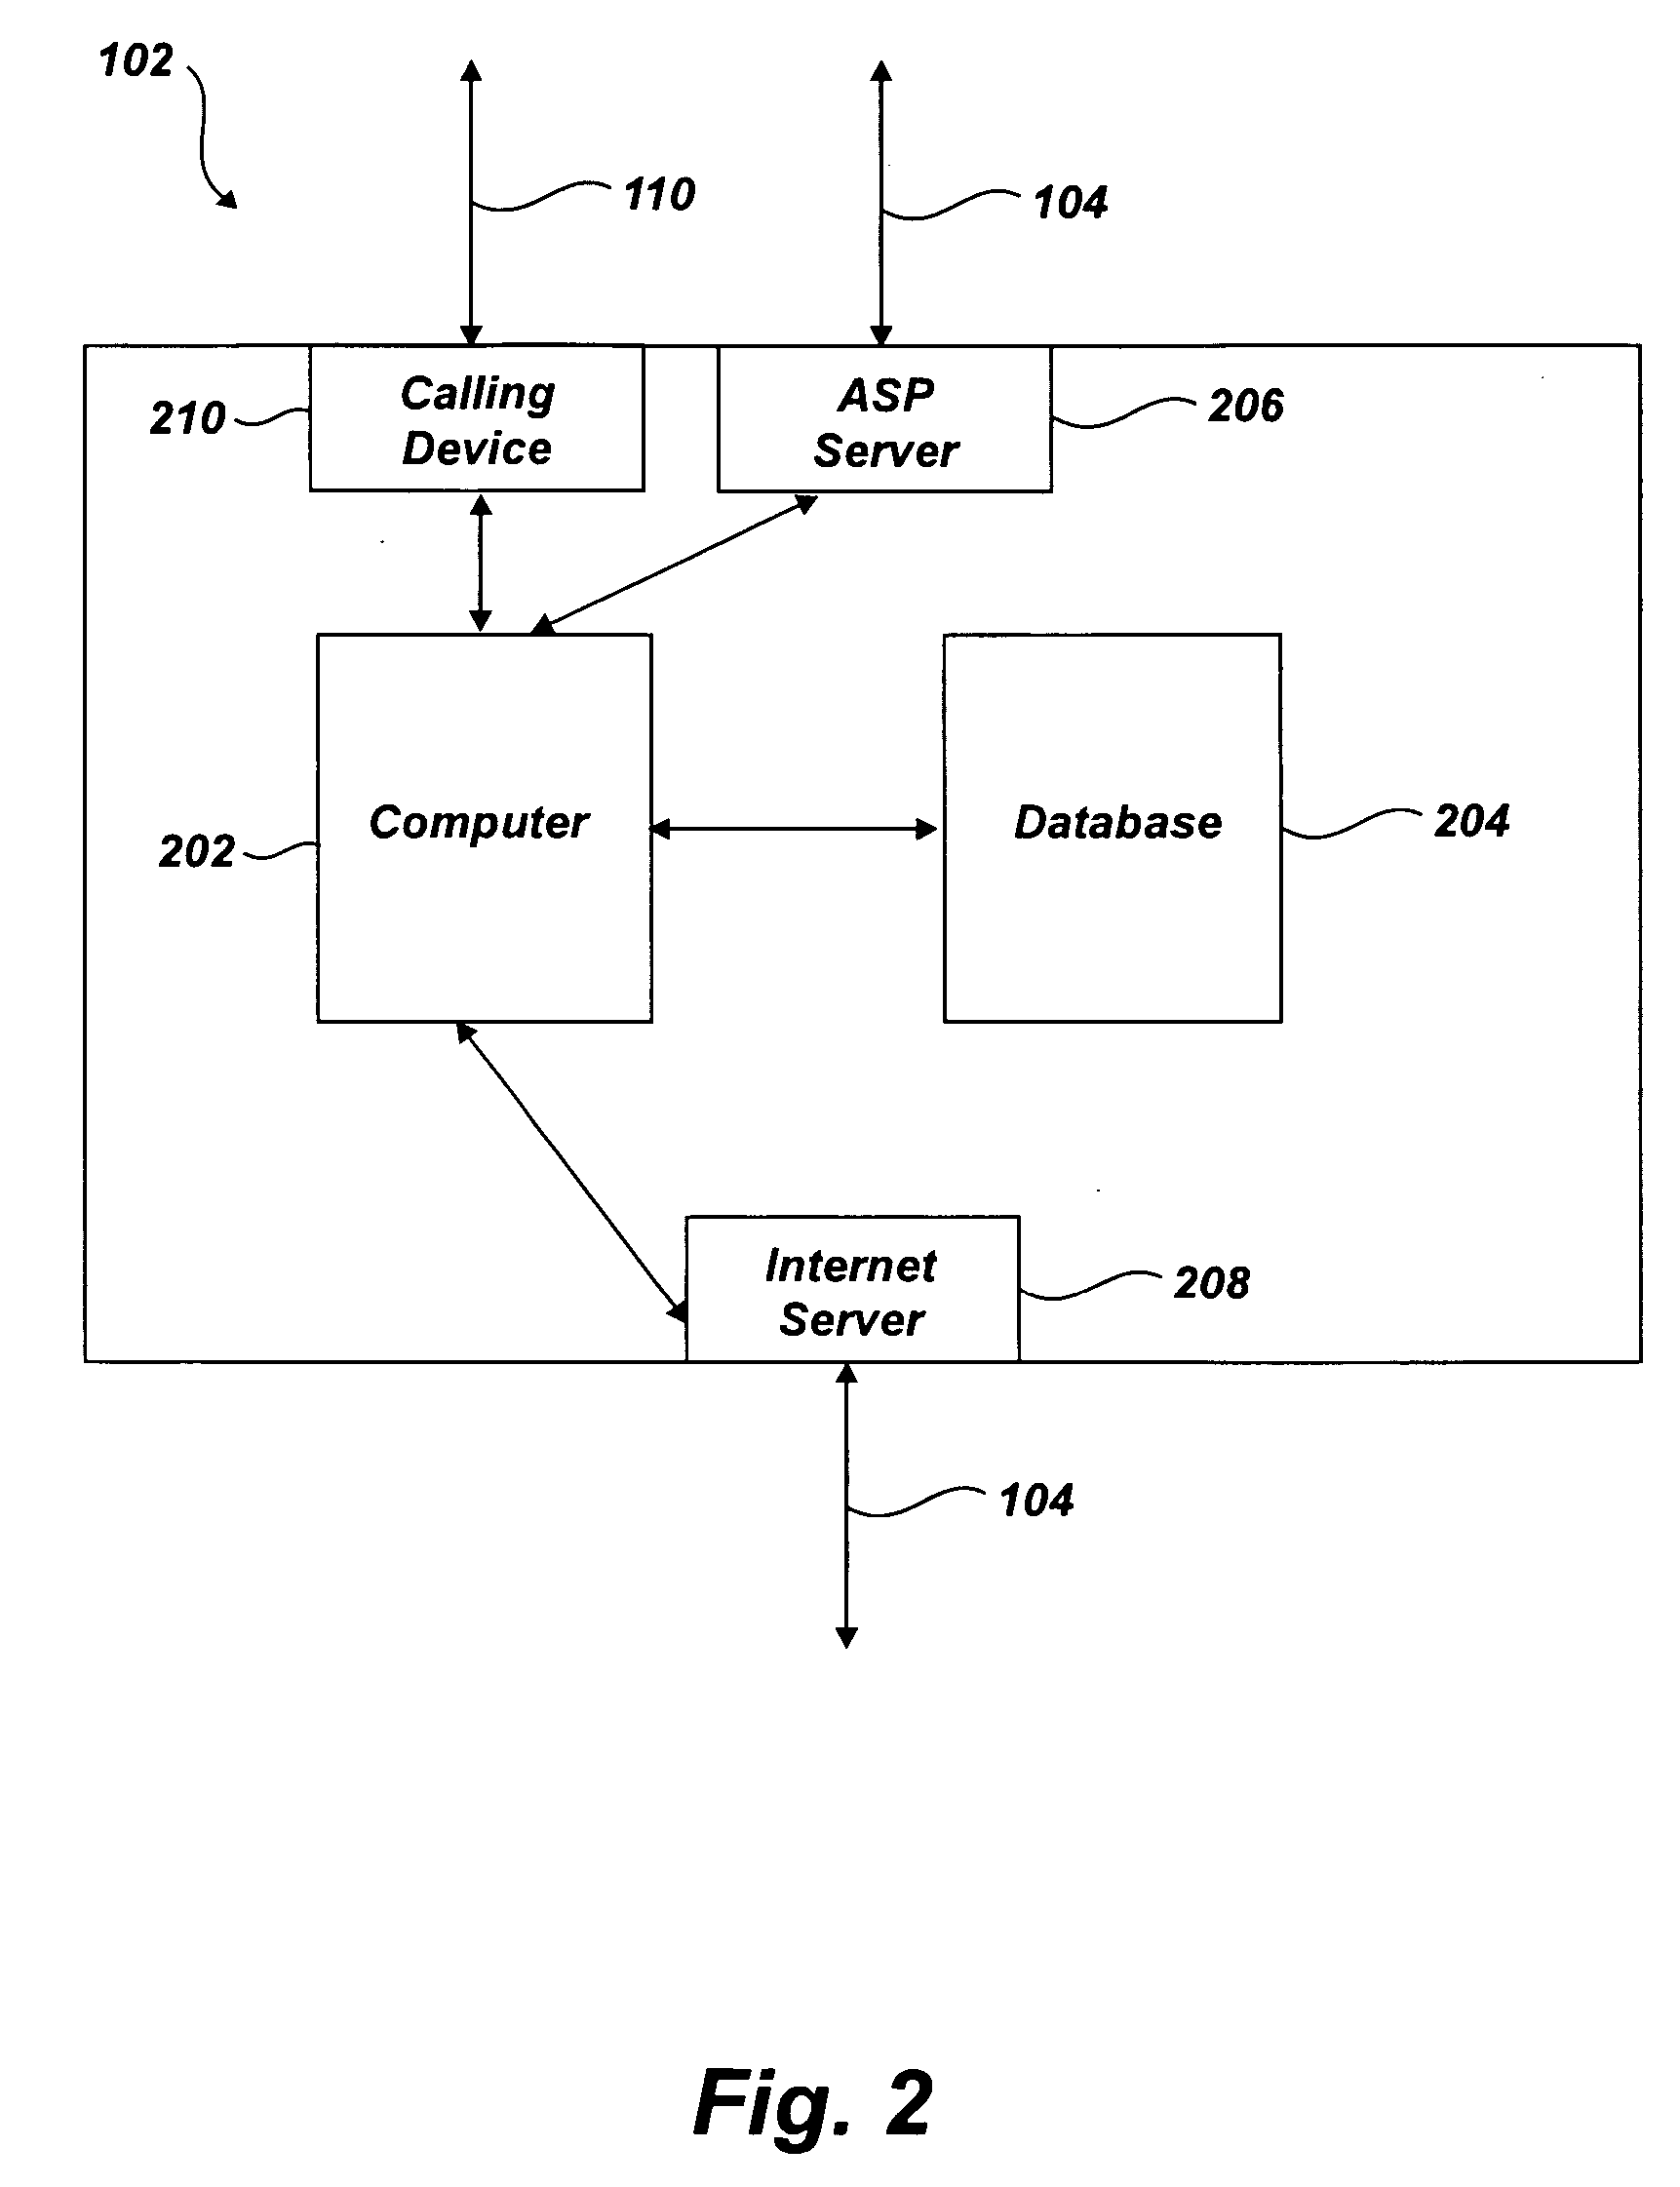 System and method for consumer engagement and revenue optimization